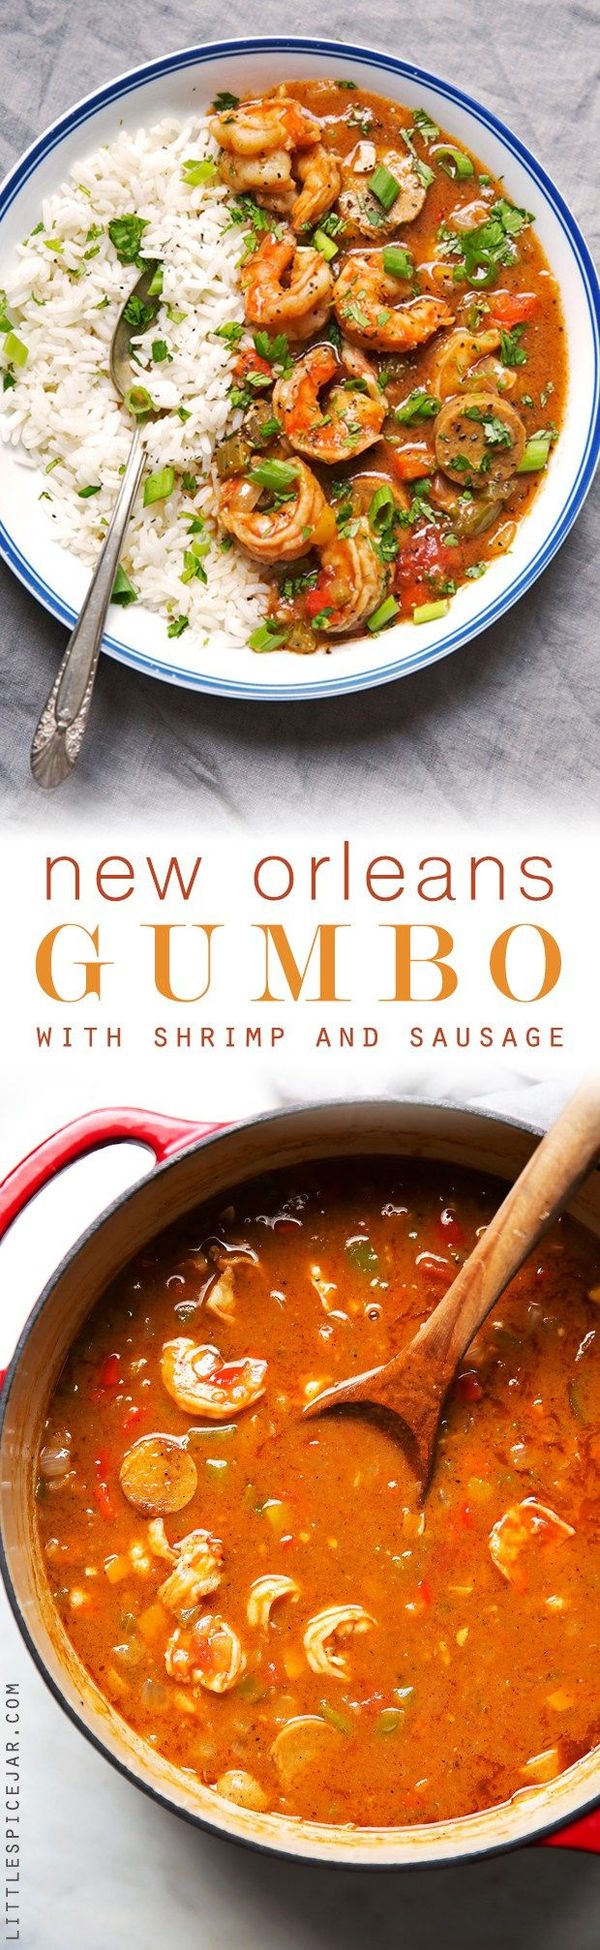 New Orleans Gumbo with Shrimp and Sausage